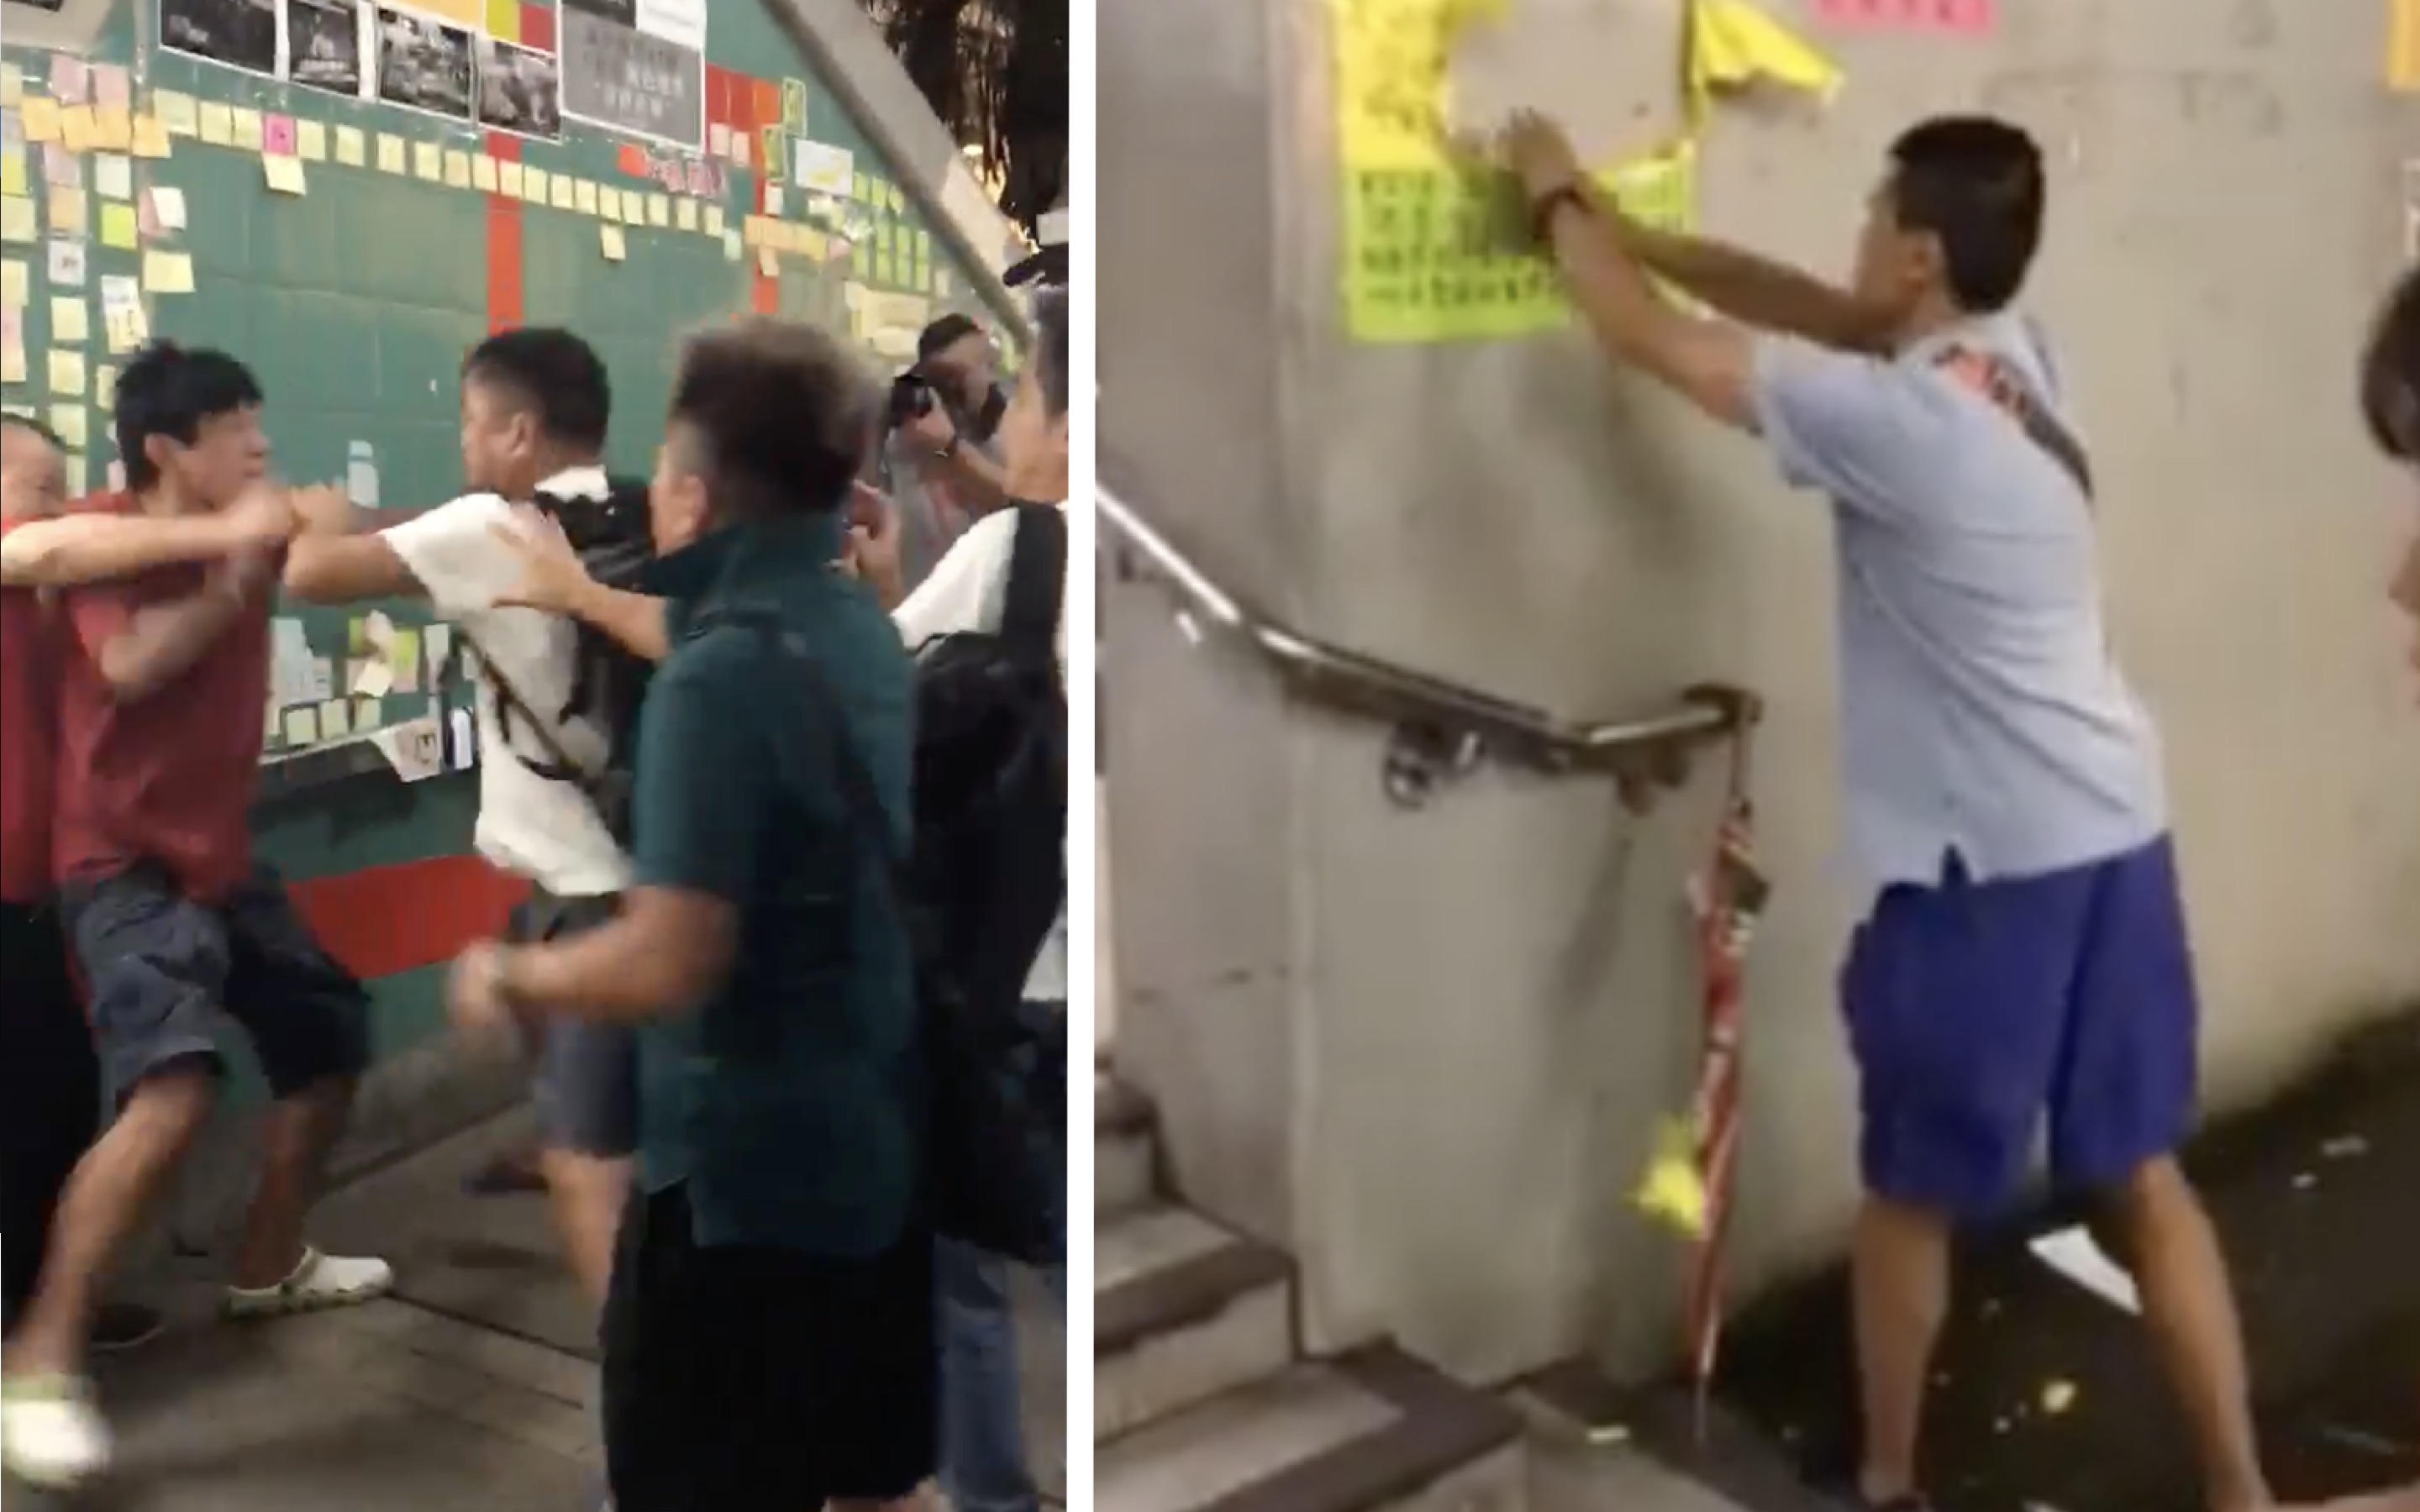 Scuffles break out at Lennon Walls in Tai Po (left) and Cheung Sha Wan (right) after people were seen trying to remove some of the Post-It notes bearing messages of support for anti-government protesters. Screengrabs via Facebook and YouTube.